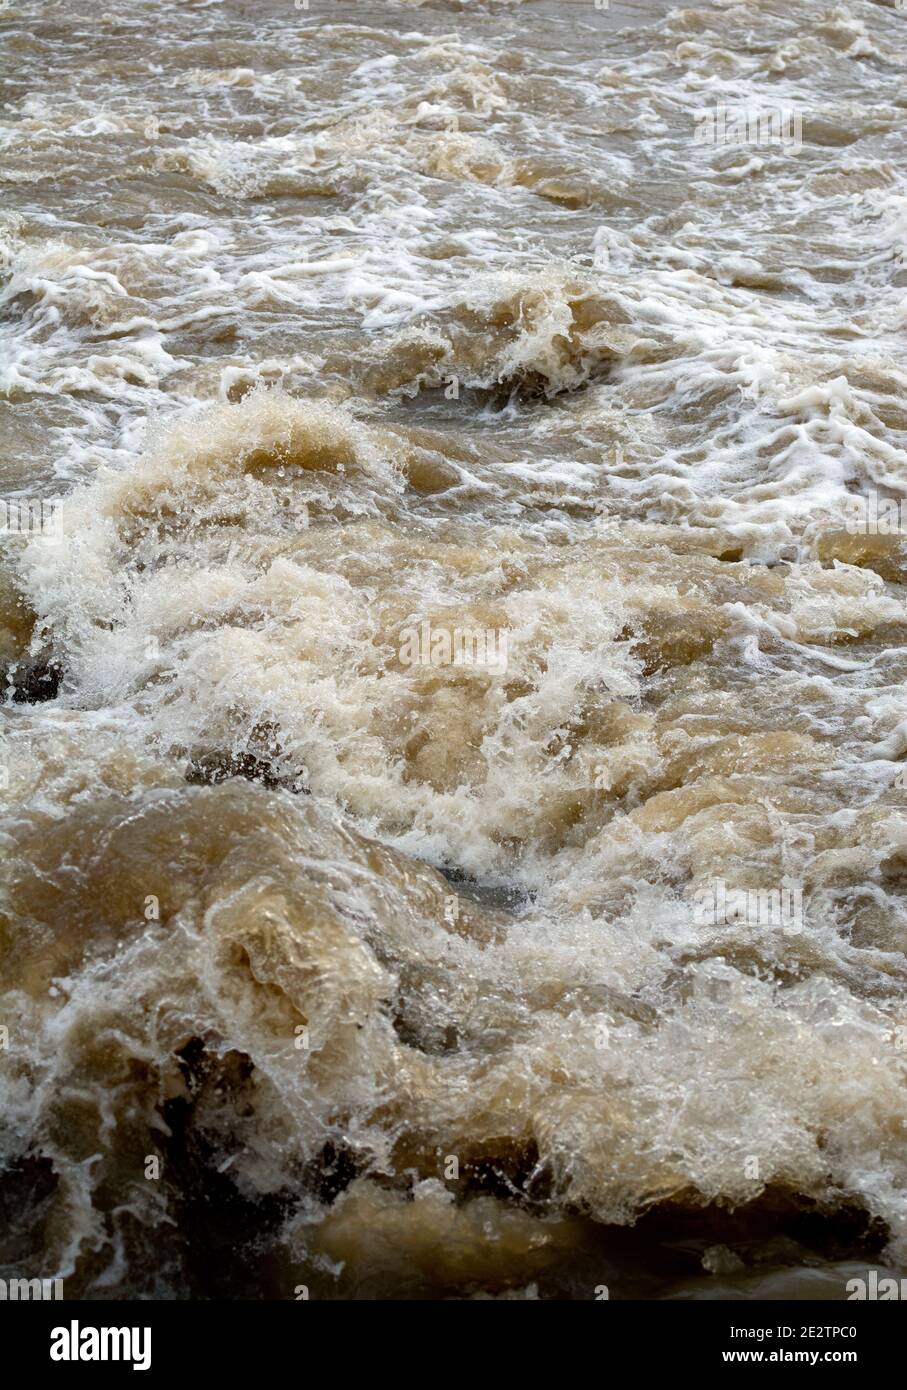 Turbulent water at a weir after heavy rainfall, Warwickshire, UK Stock Photo